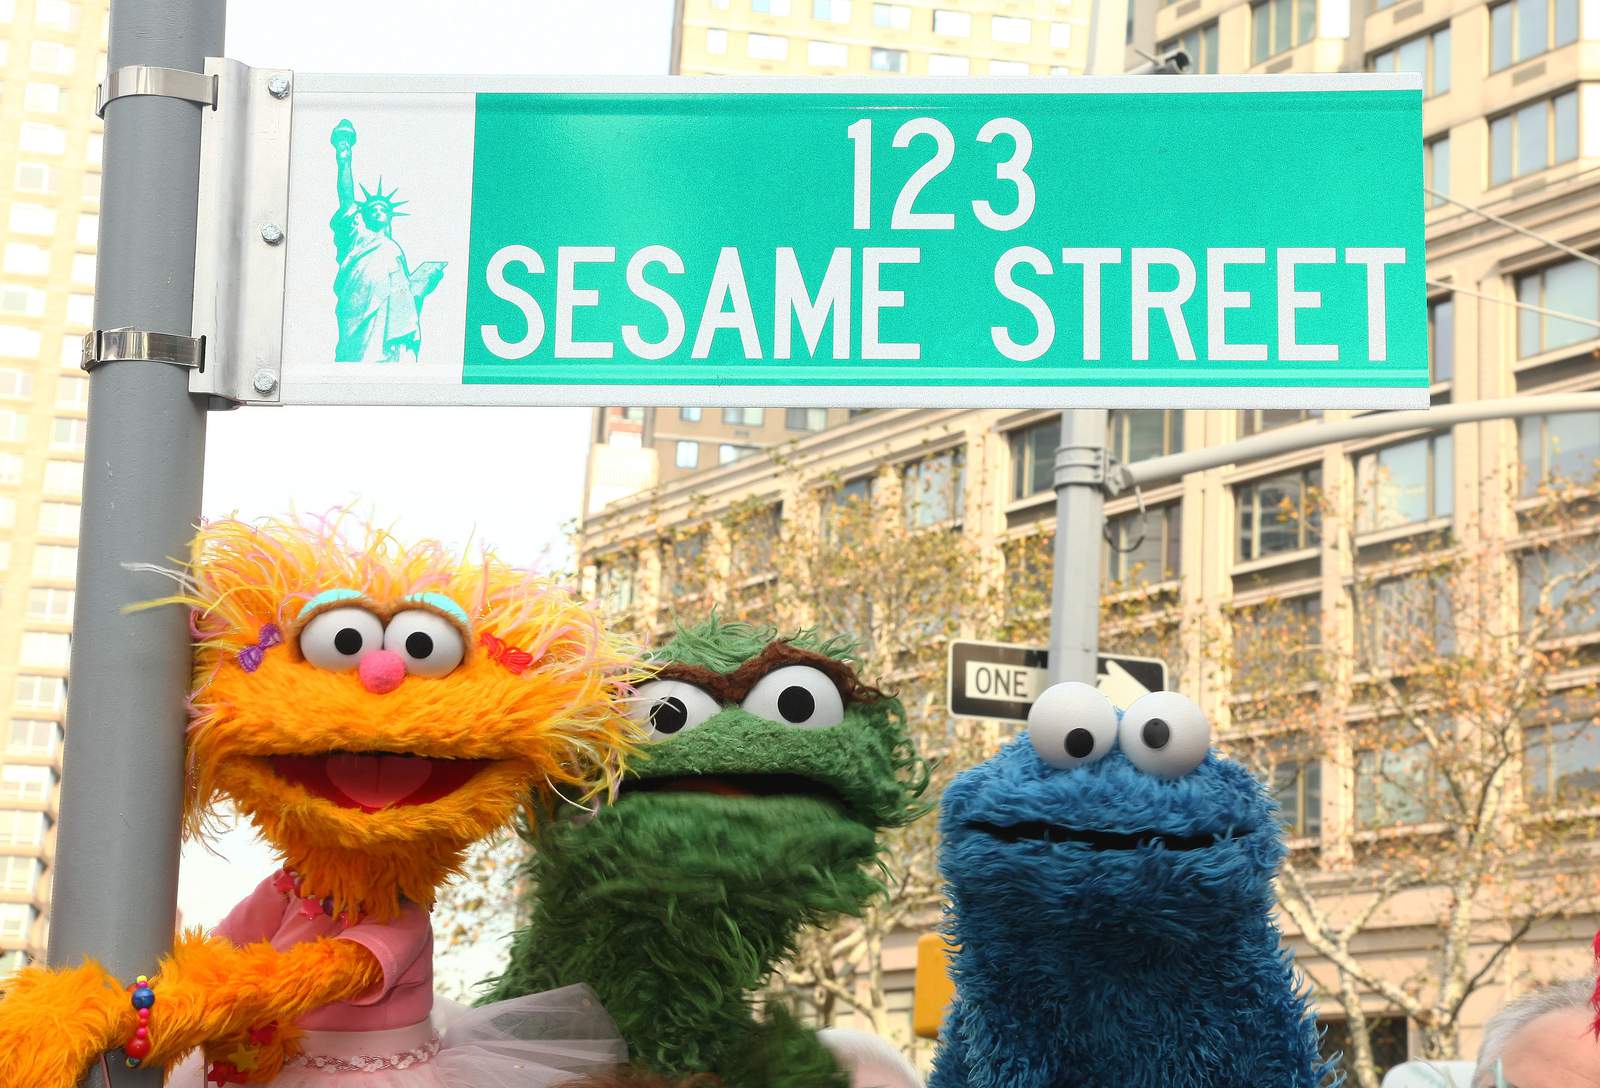 ‘Sesame Street’ to host a town hall addressing racism